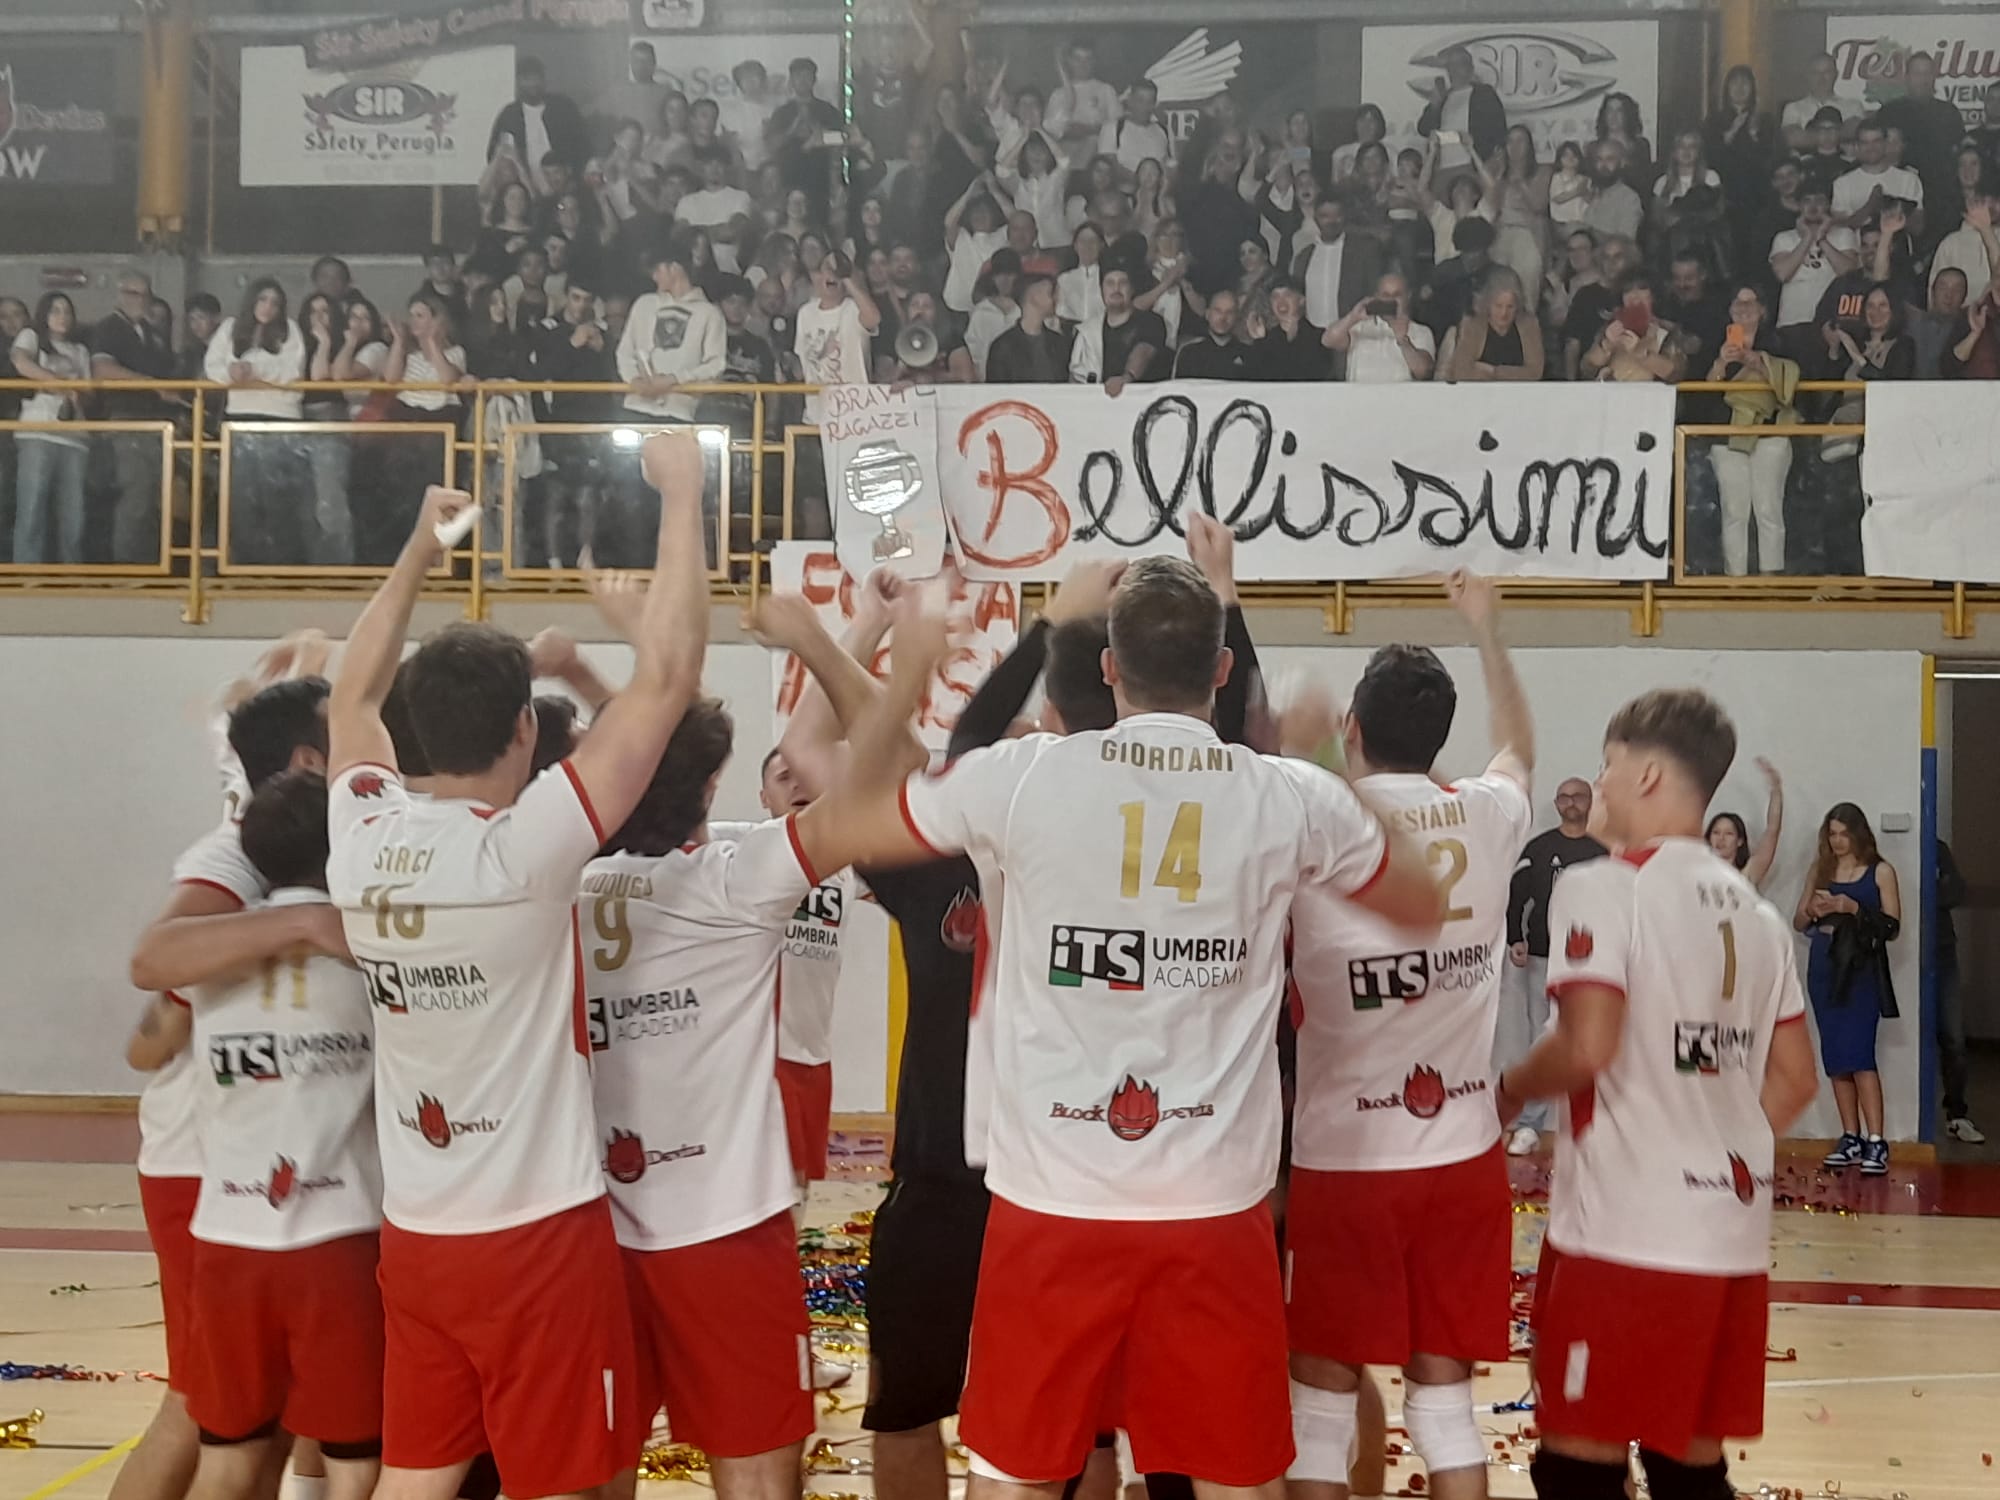 LA ITS SIR UMBRIA ACADEMY ASSISI VOLA IN SERIE B